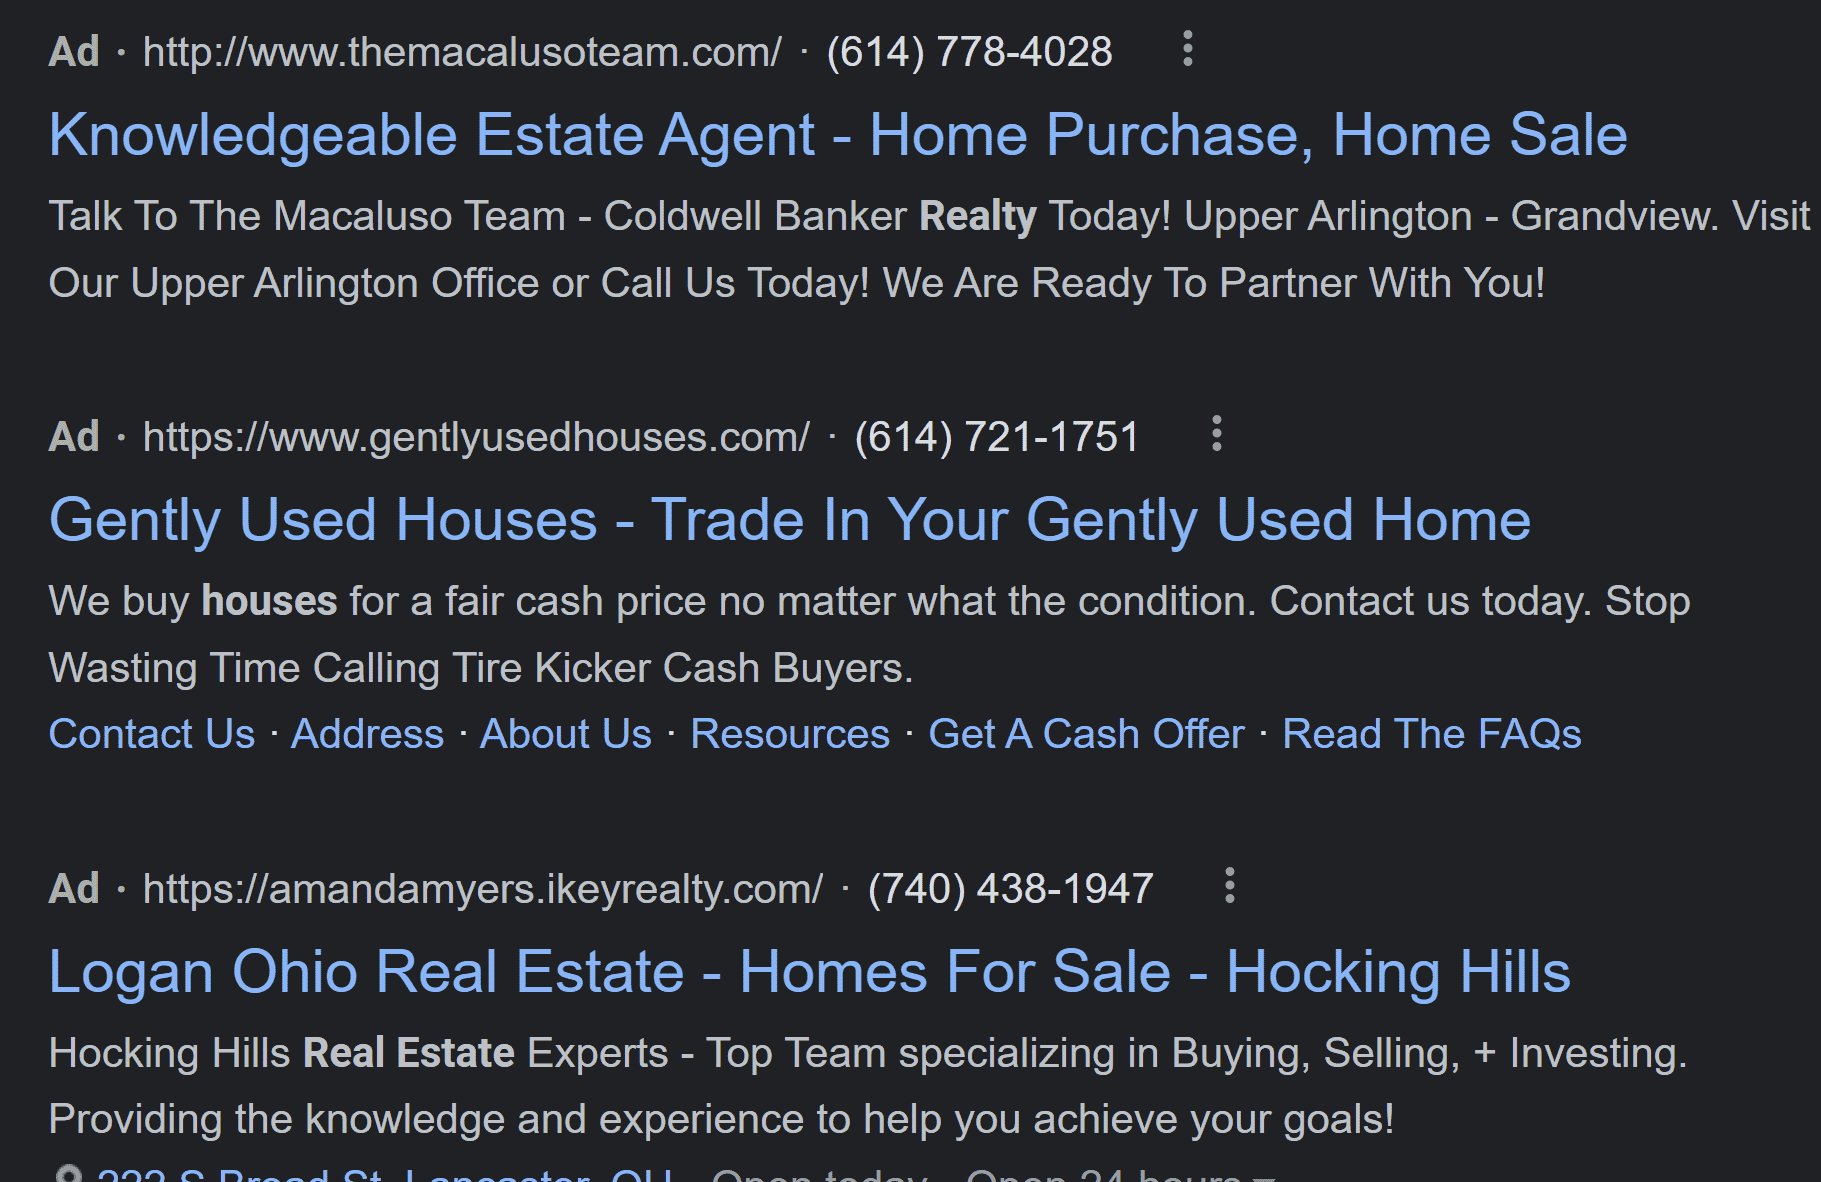 real estate for sale